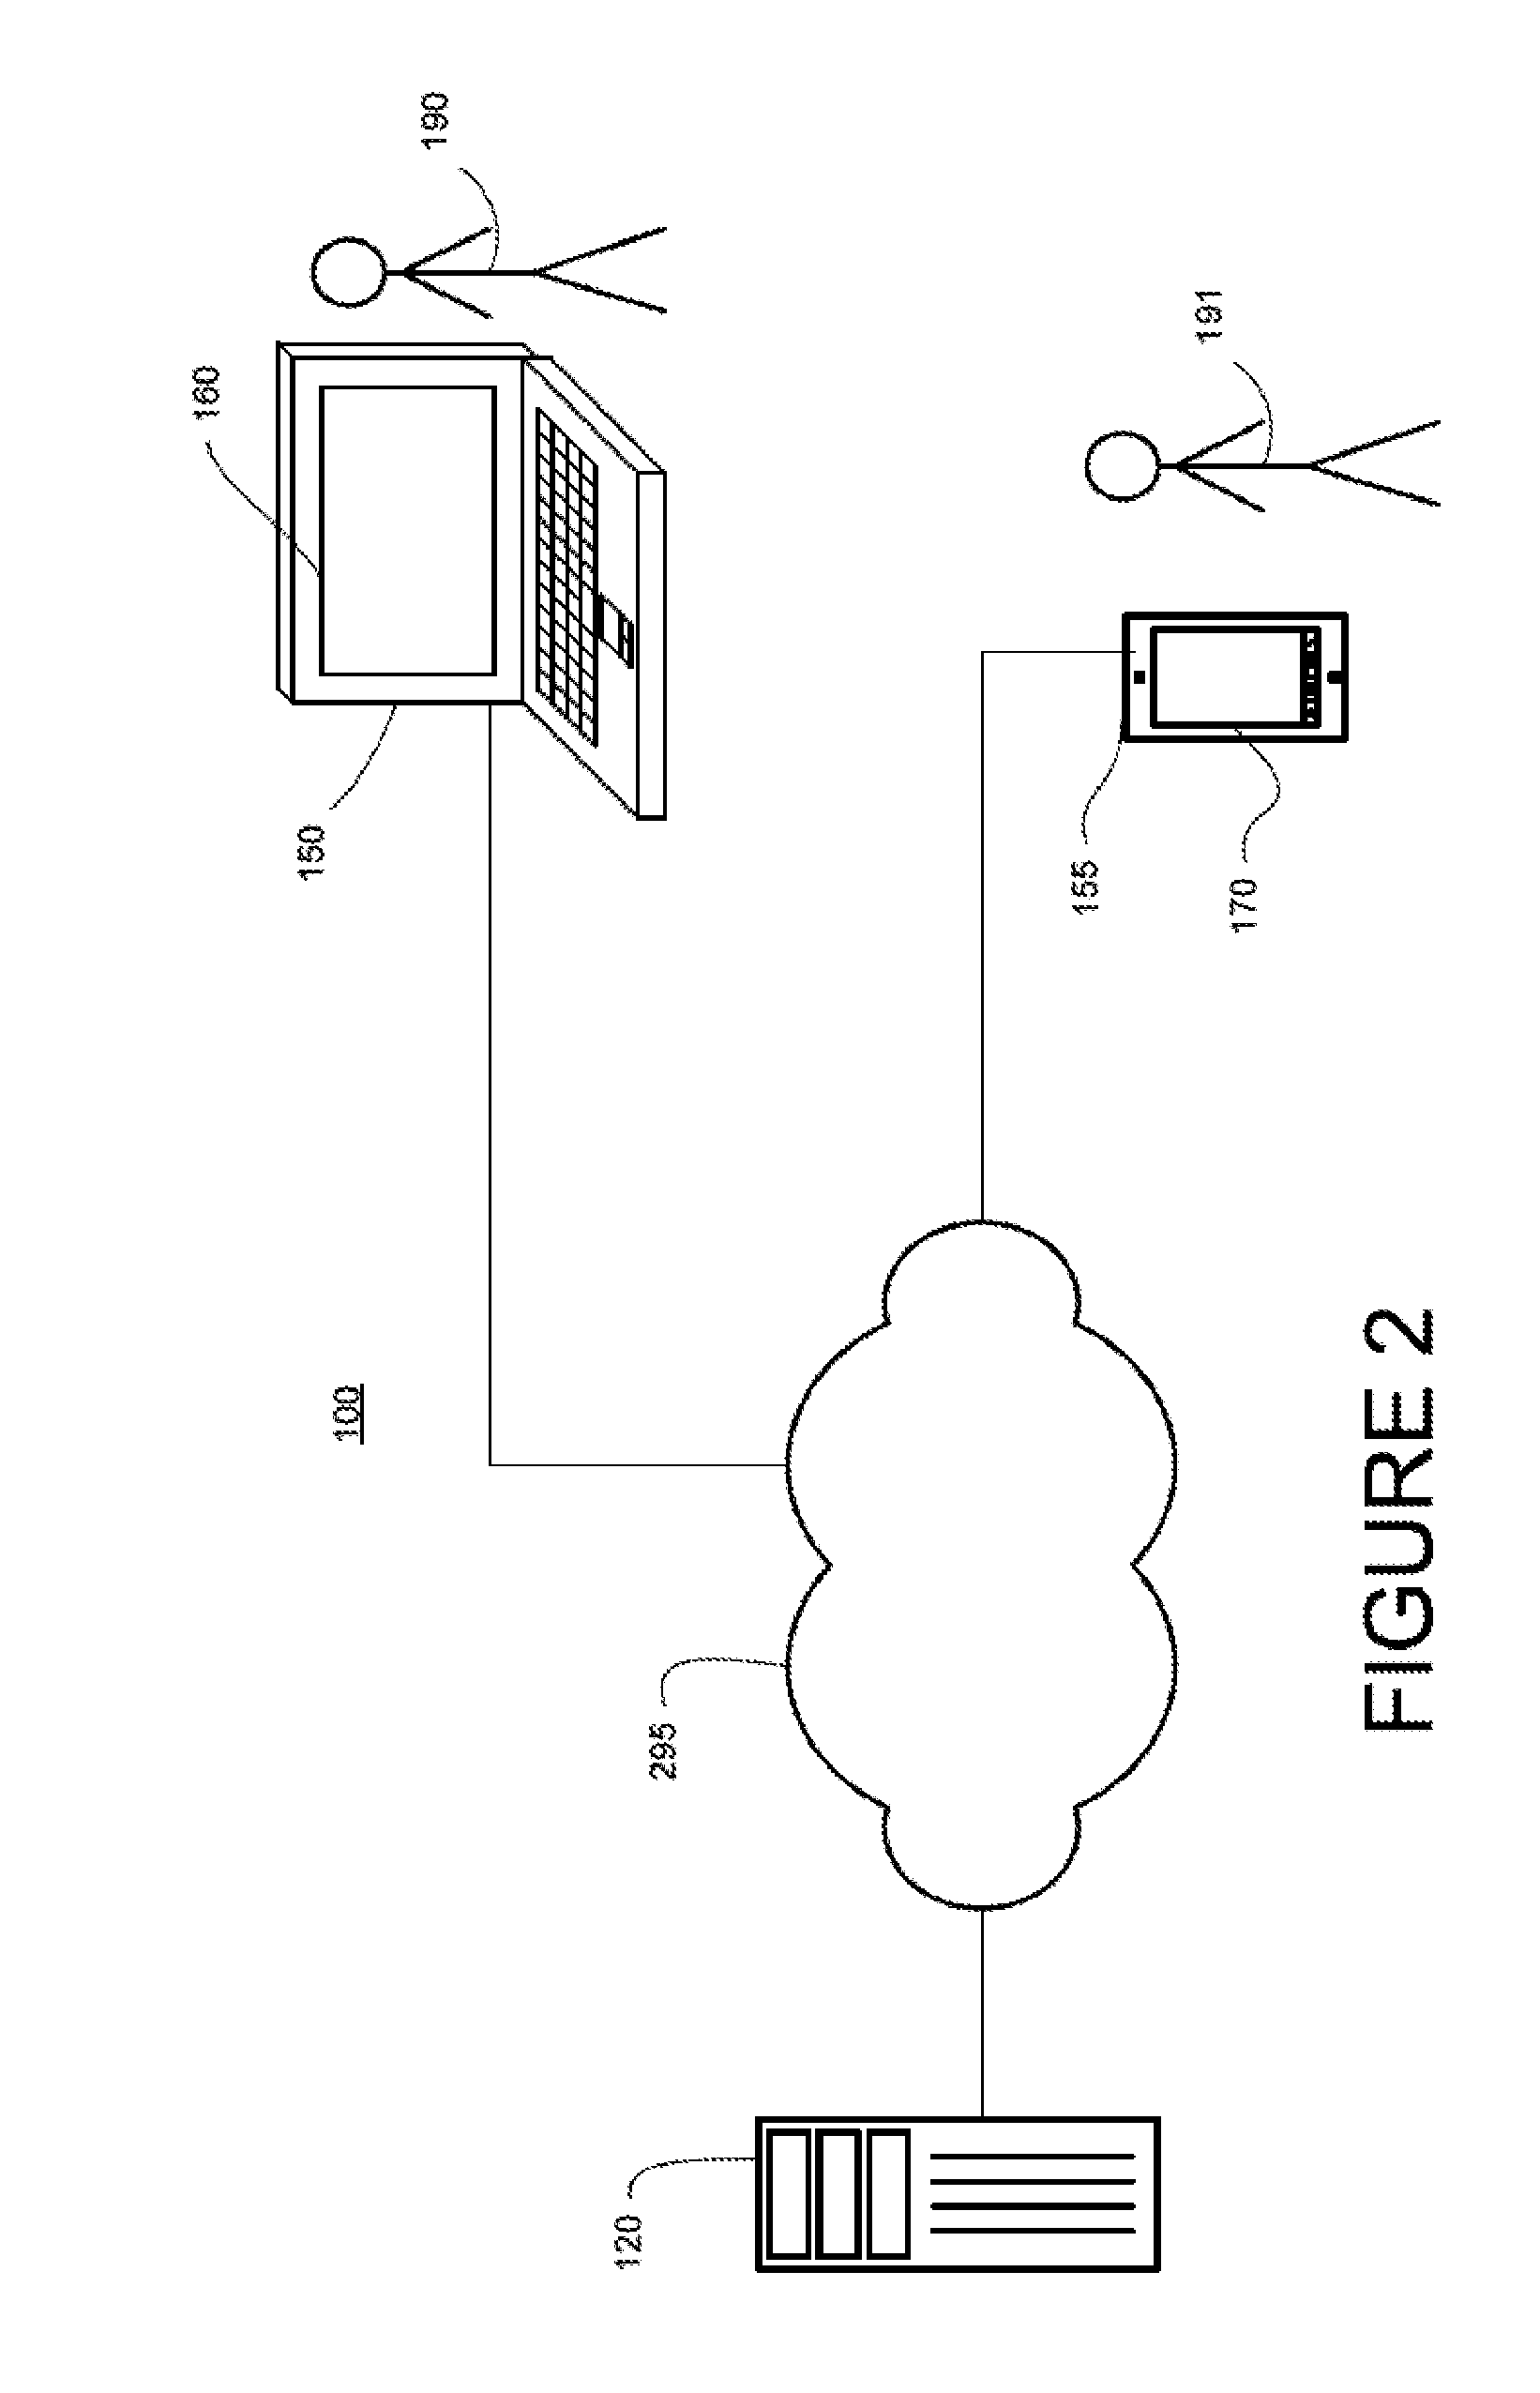 Method and apparatus of route guidance